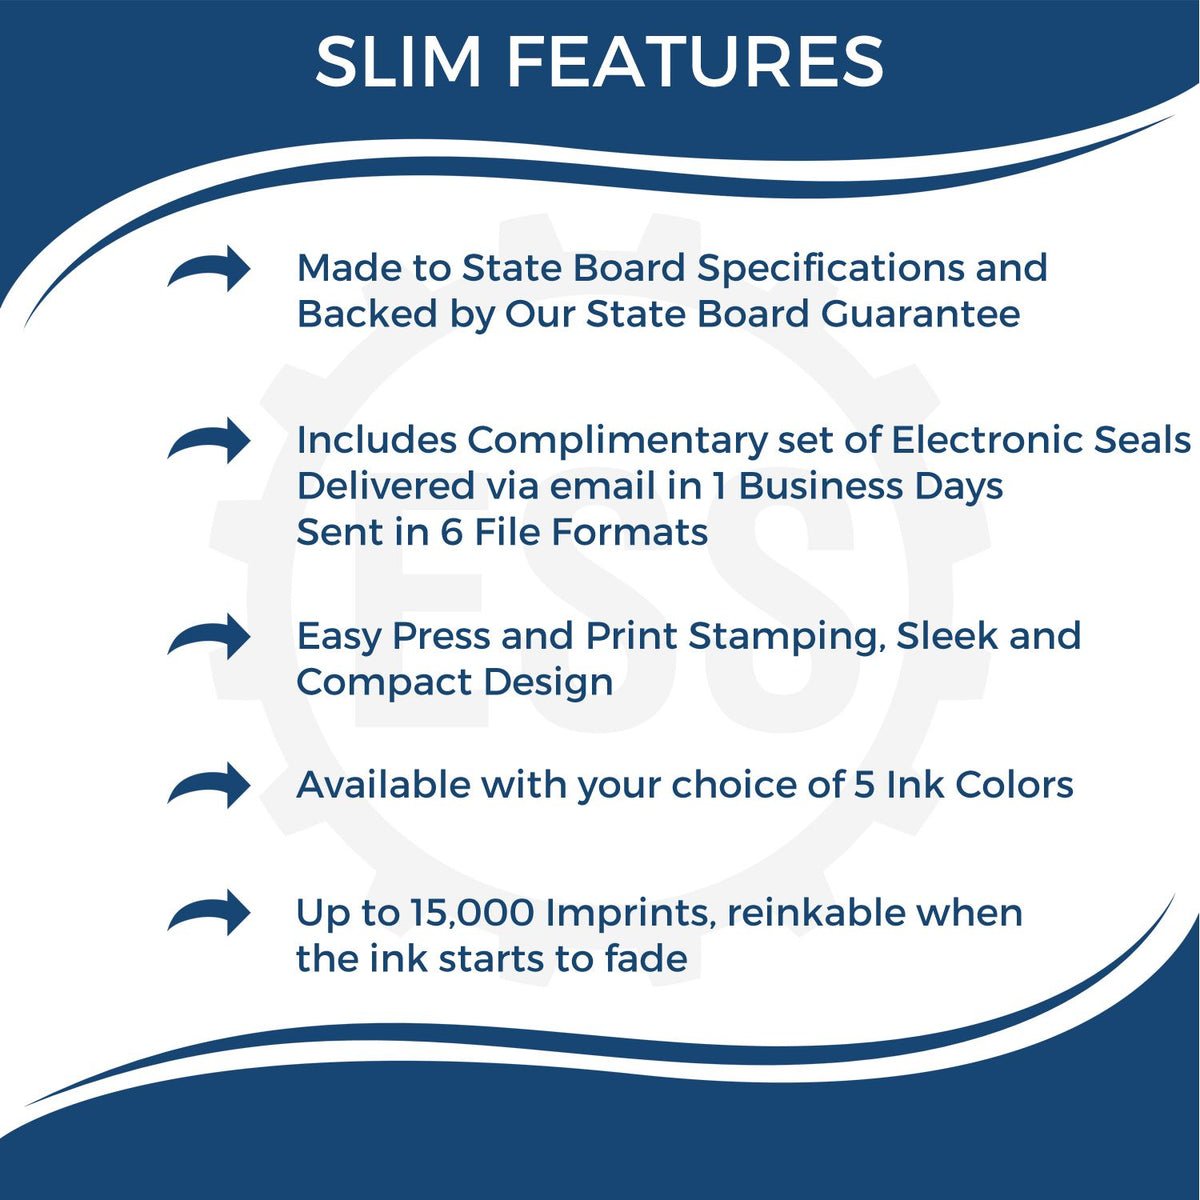 A picture of an infographic highlighting the selling points for the Super Slim Illinois Notary Public Stamp